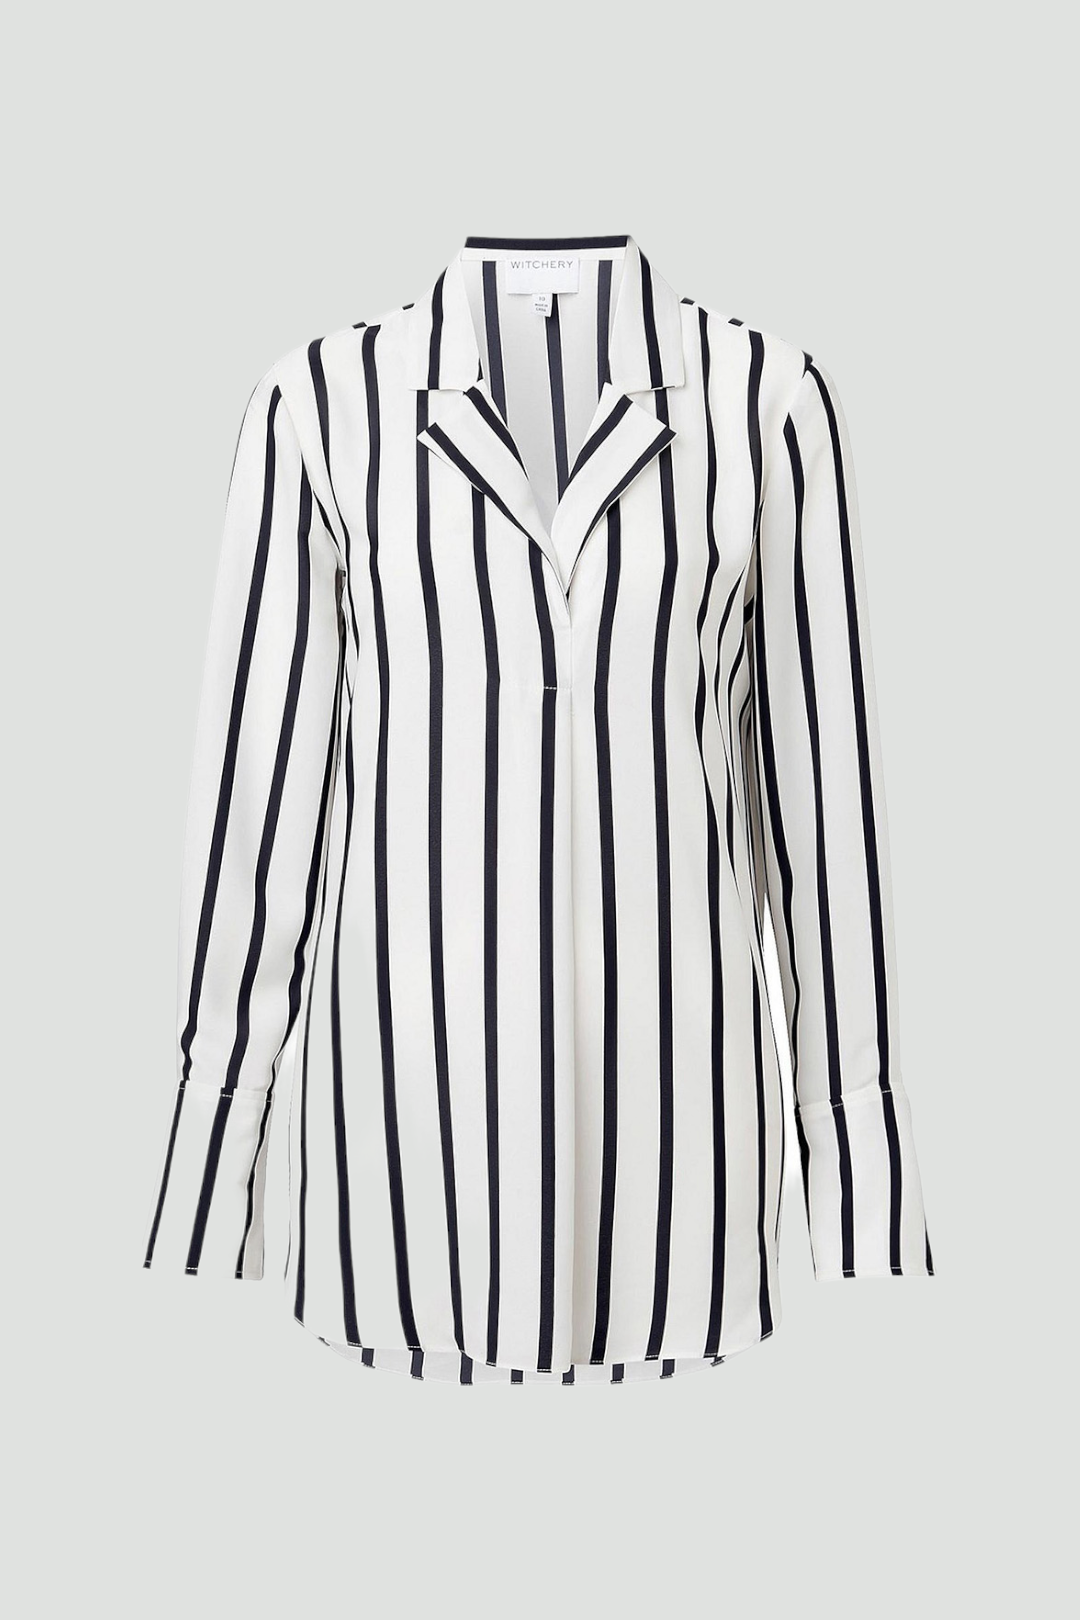 Witchery Black and White Striped Long Sleeve Shirt